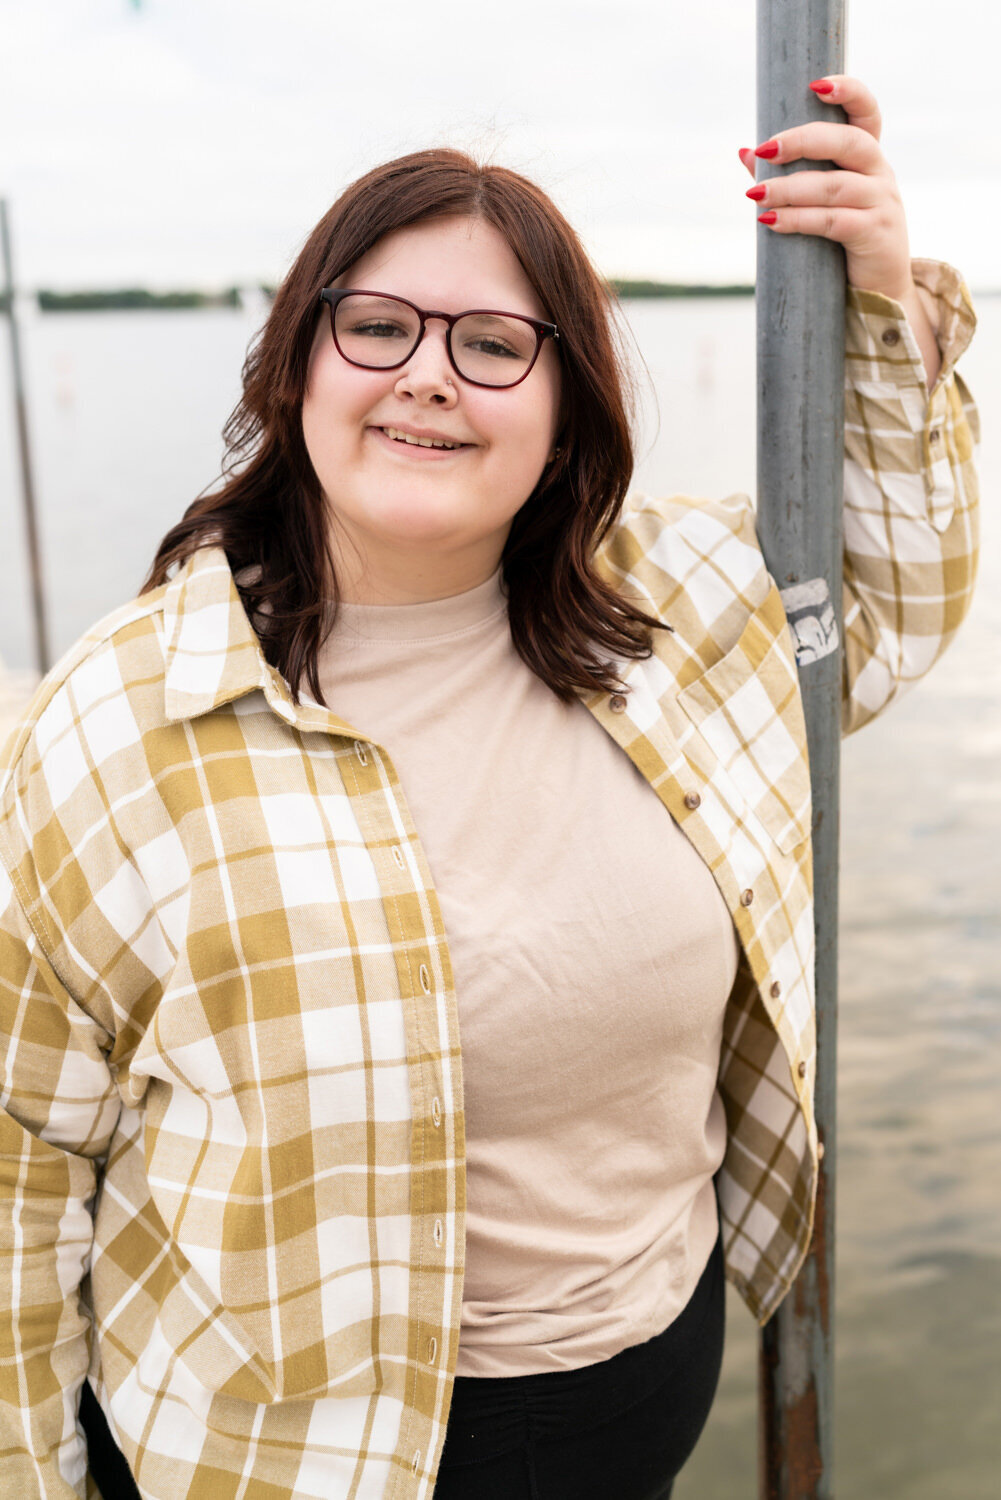 Plus size senior girl smiles with glasses on in front of a lake in Wayzata, Minnesota.